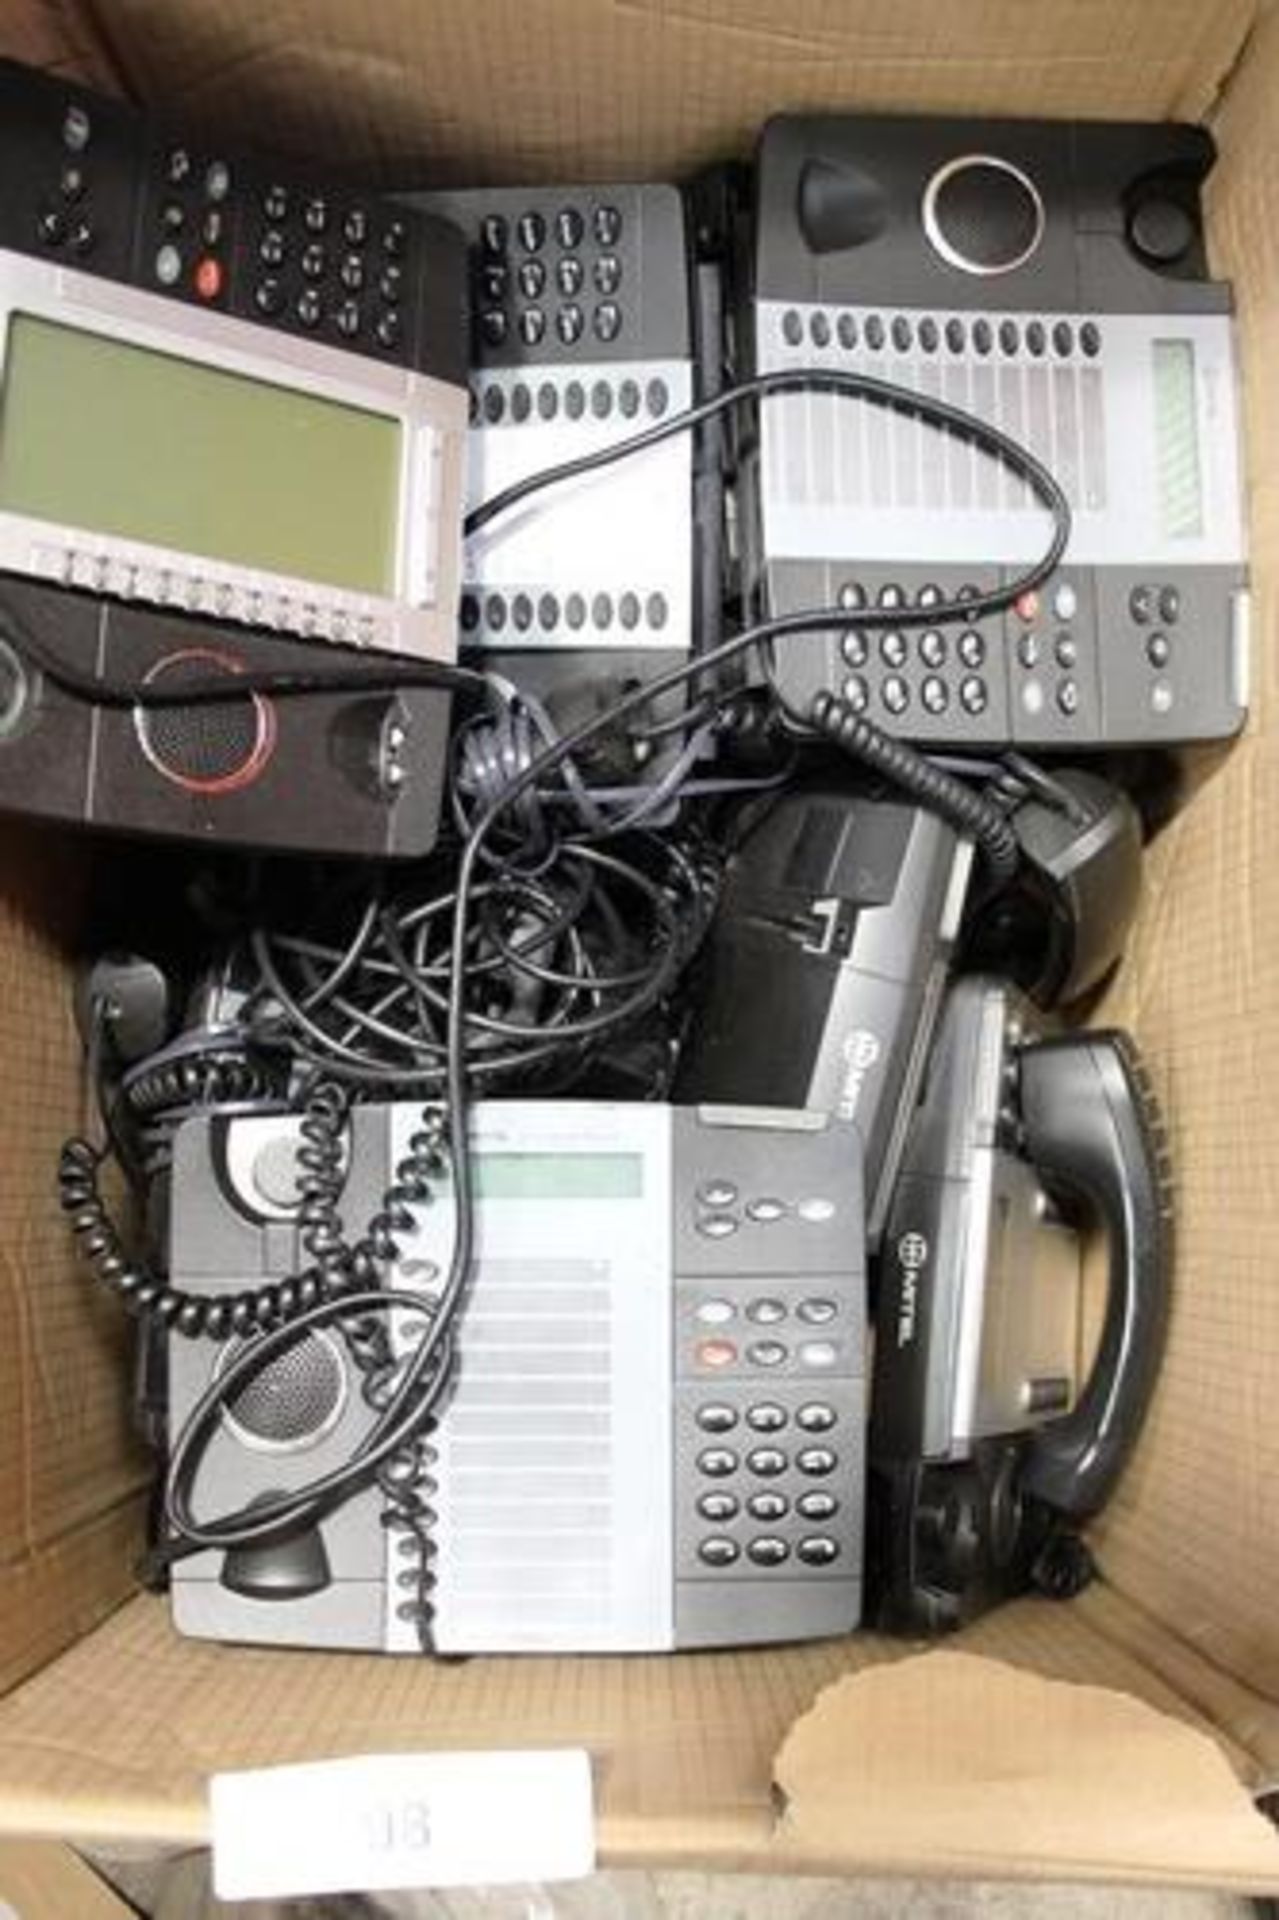 1 x box of office phones including Mitel etc, together with 1 x box of 5 rack distribution units - - Image 2 of 2